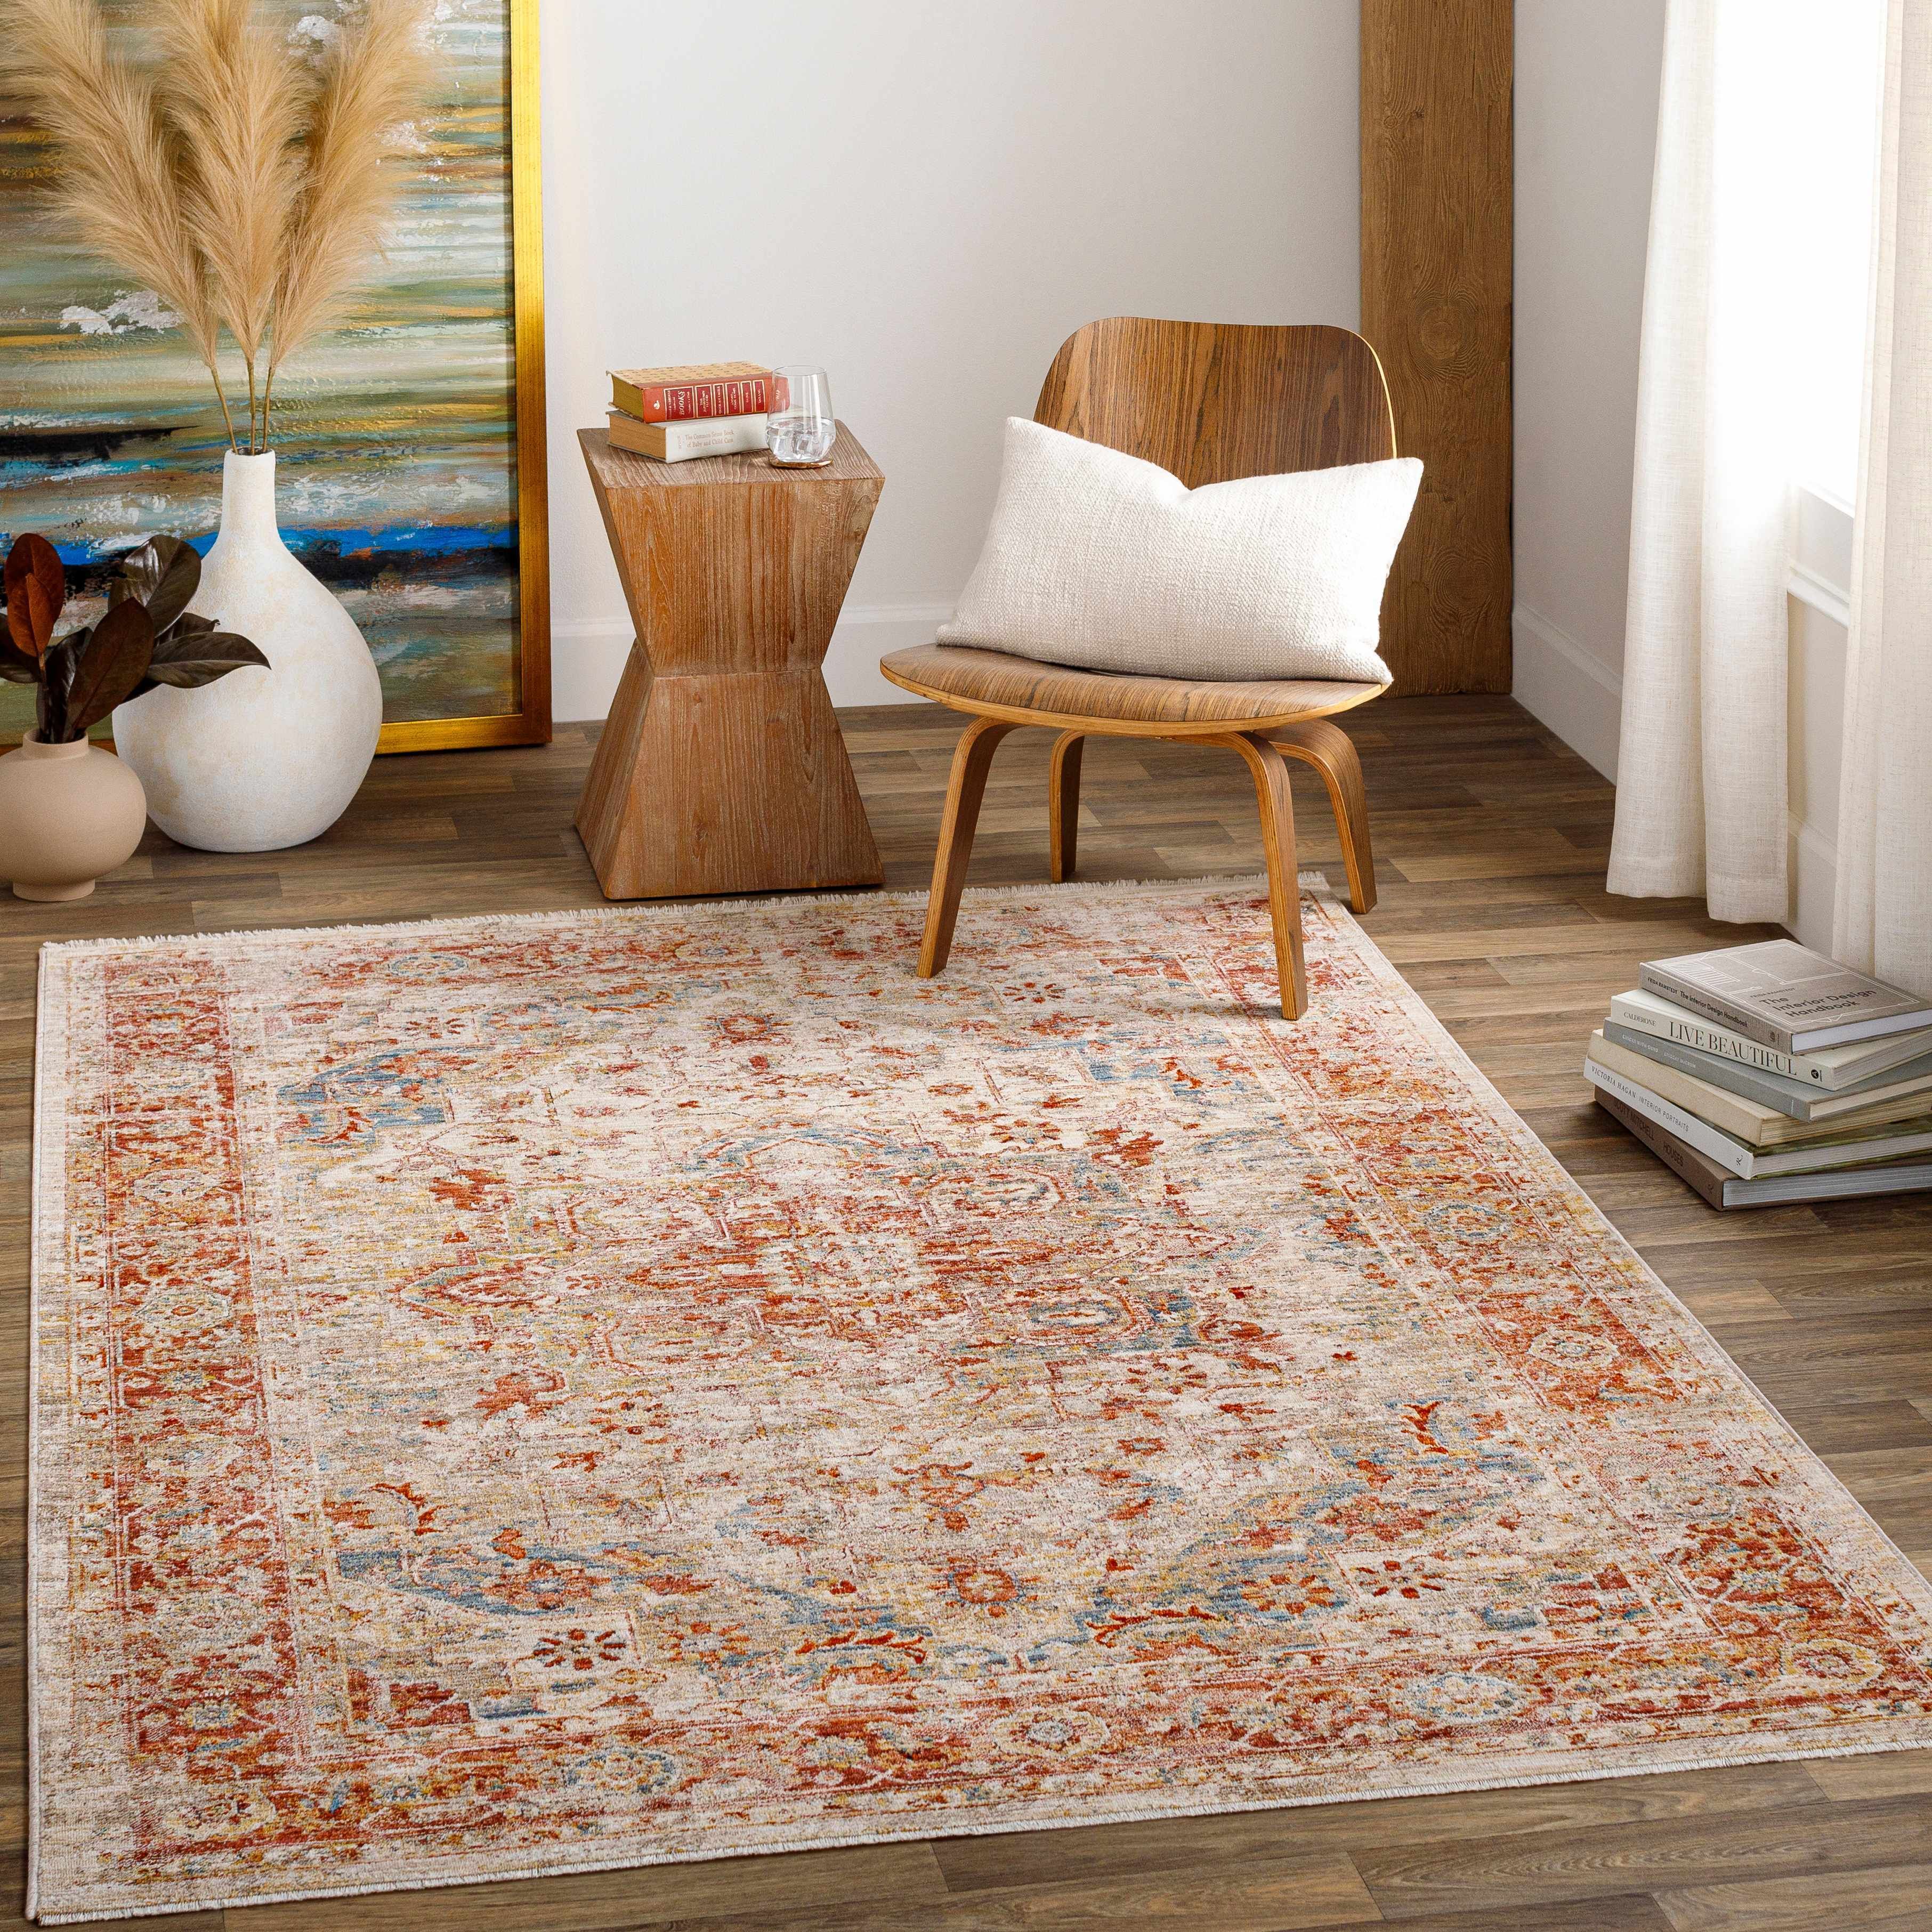 Balete Area Rug | Boutique Rugs